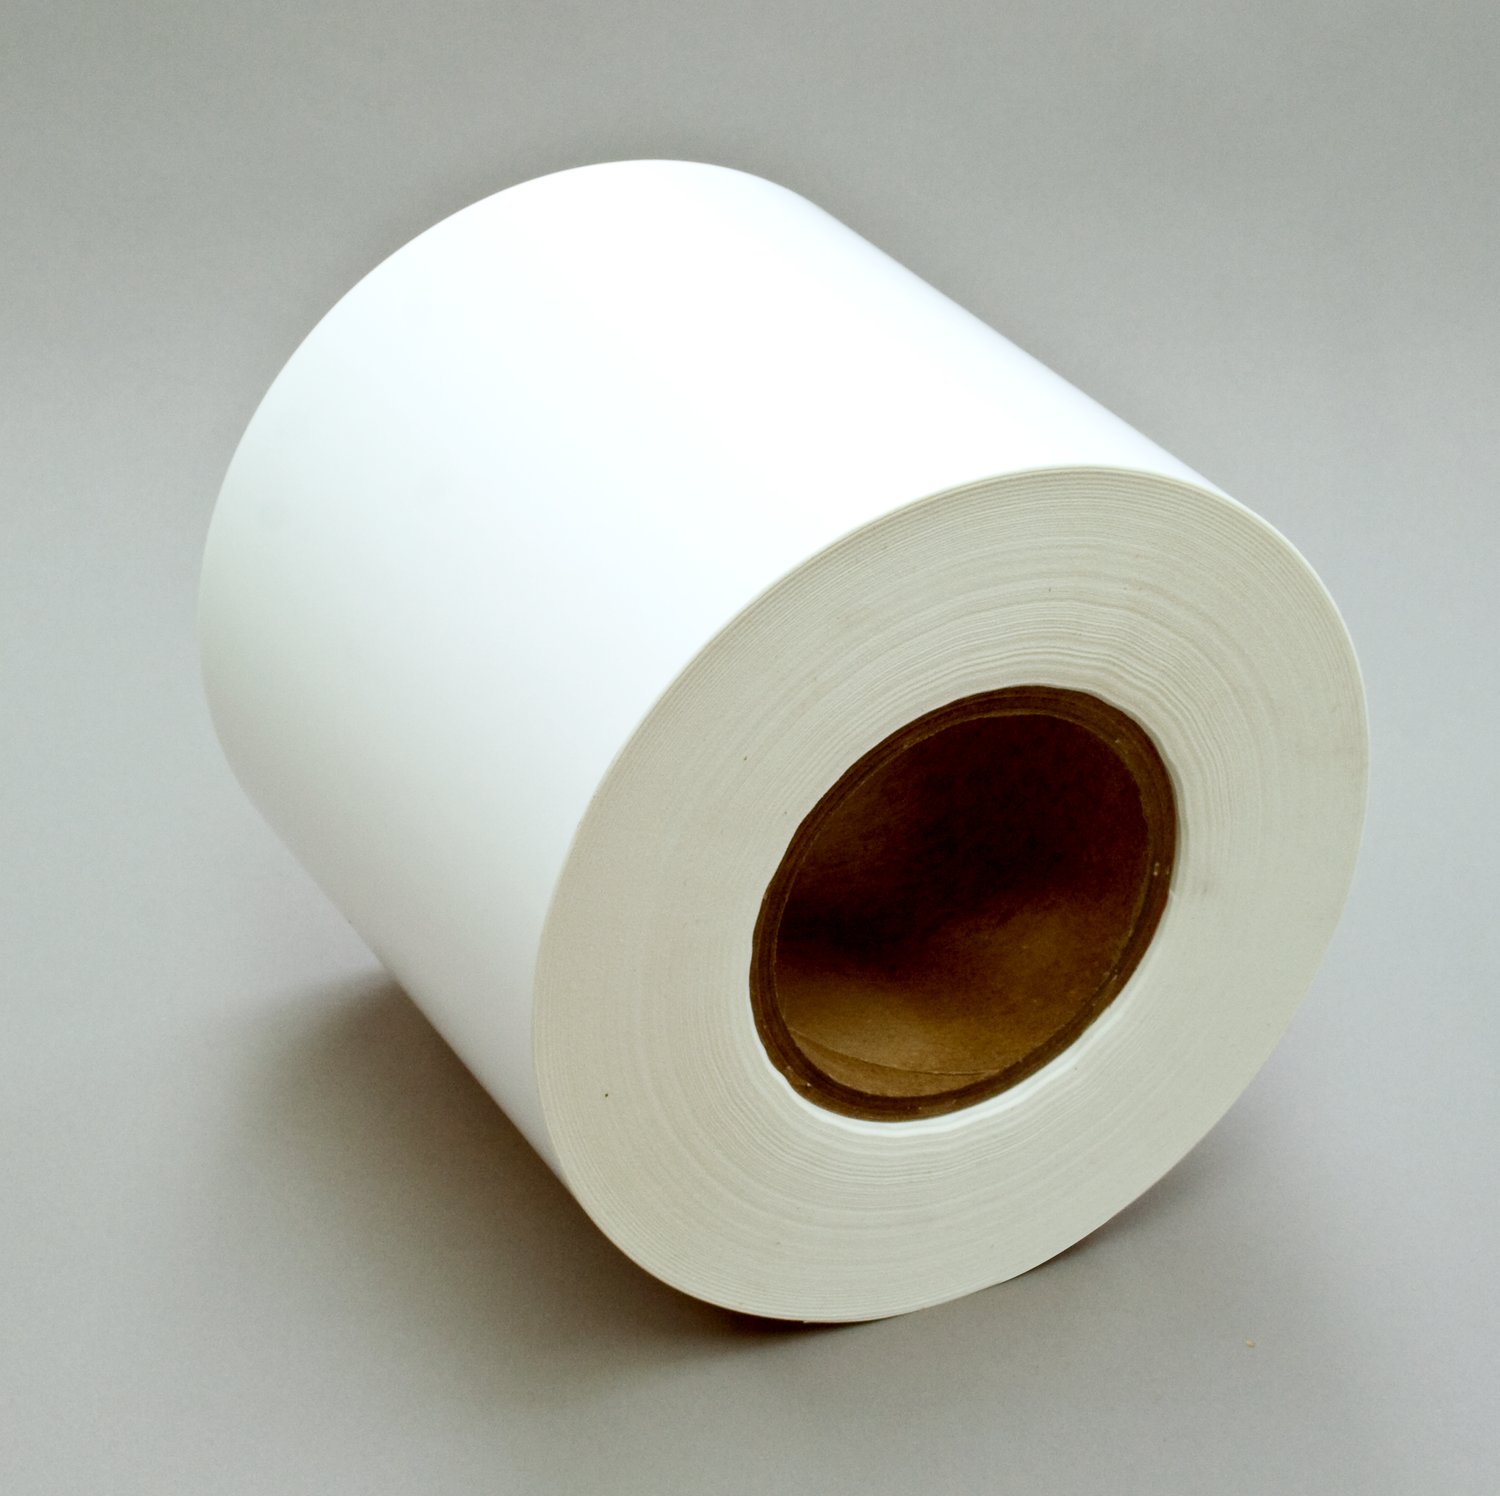 7100072909 - 3M Sheet and Screen Label Material 7220SA, White Polyester, Roll,
Config